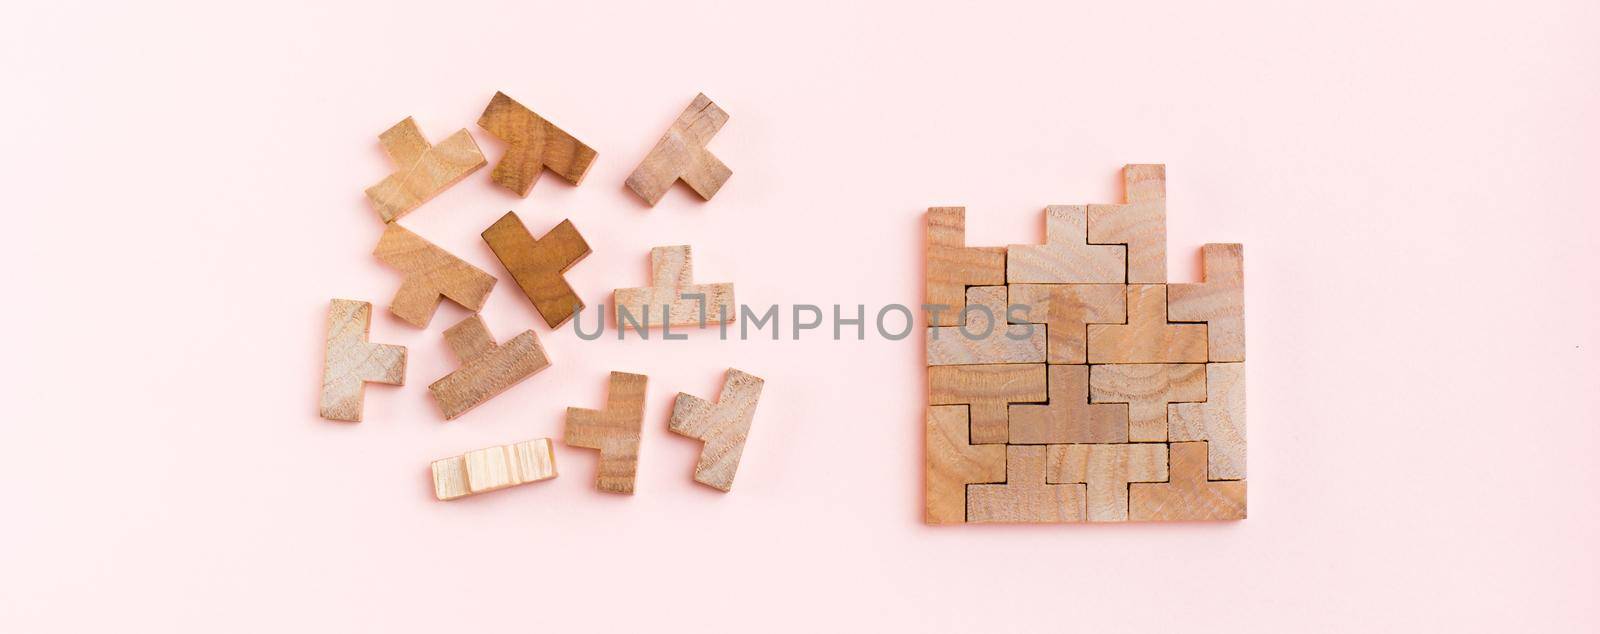 Organization and order. Wooden puzzle pieces are stacked correctly and chaotically scattered in disarray on a pink background. Web banner by Aleruana